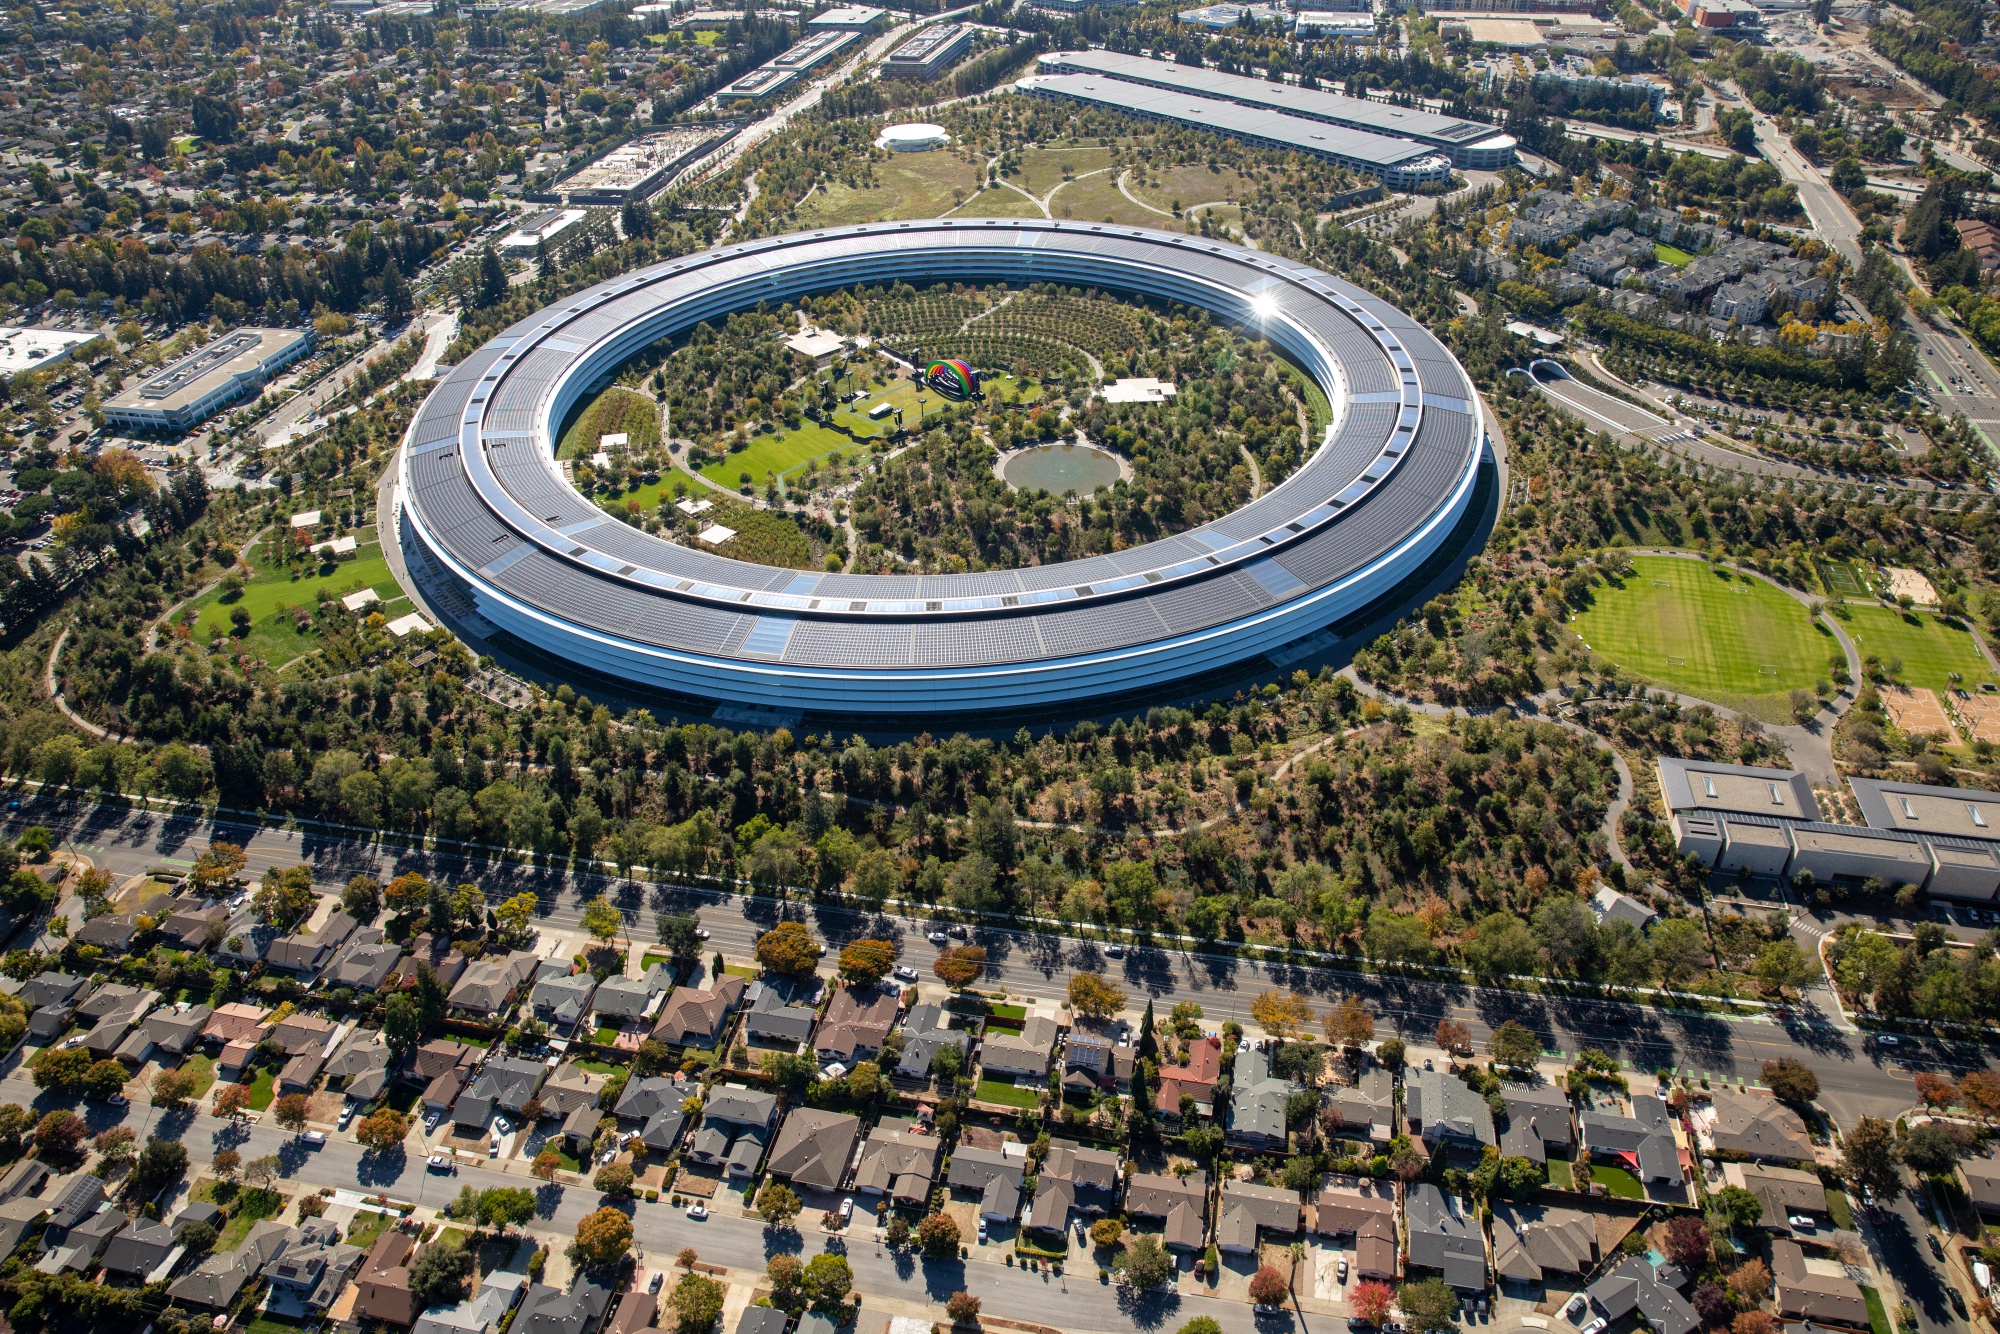 Apple plans to slow its hiring next year, according to people familiar with the matter.